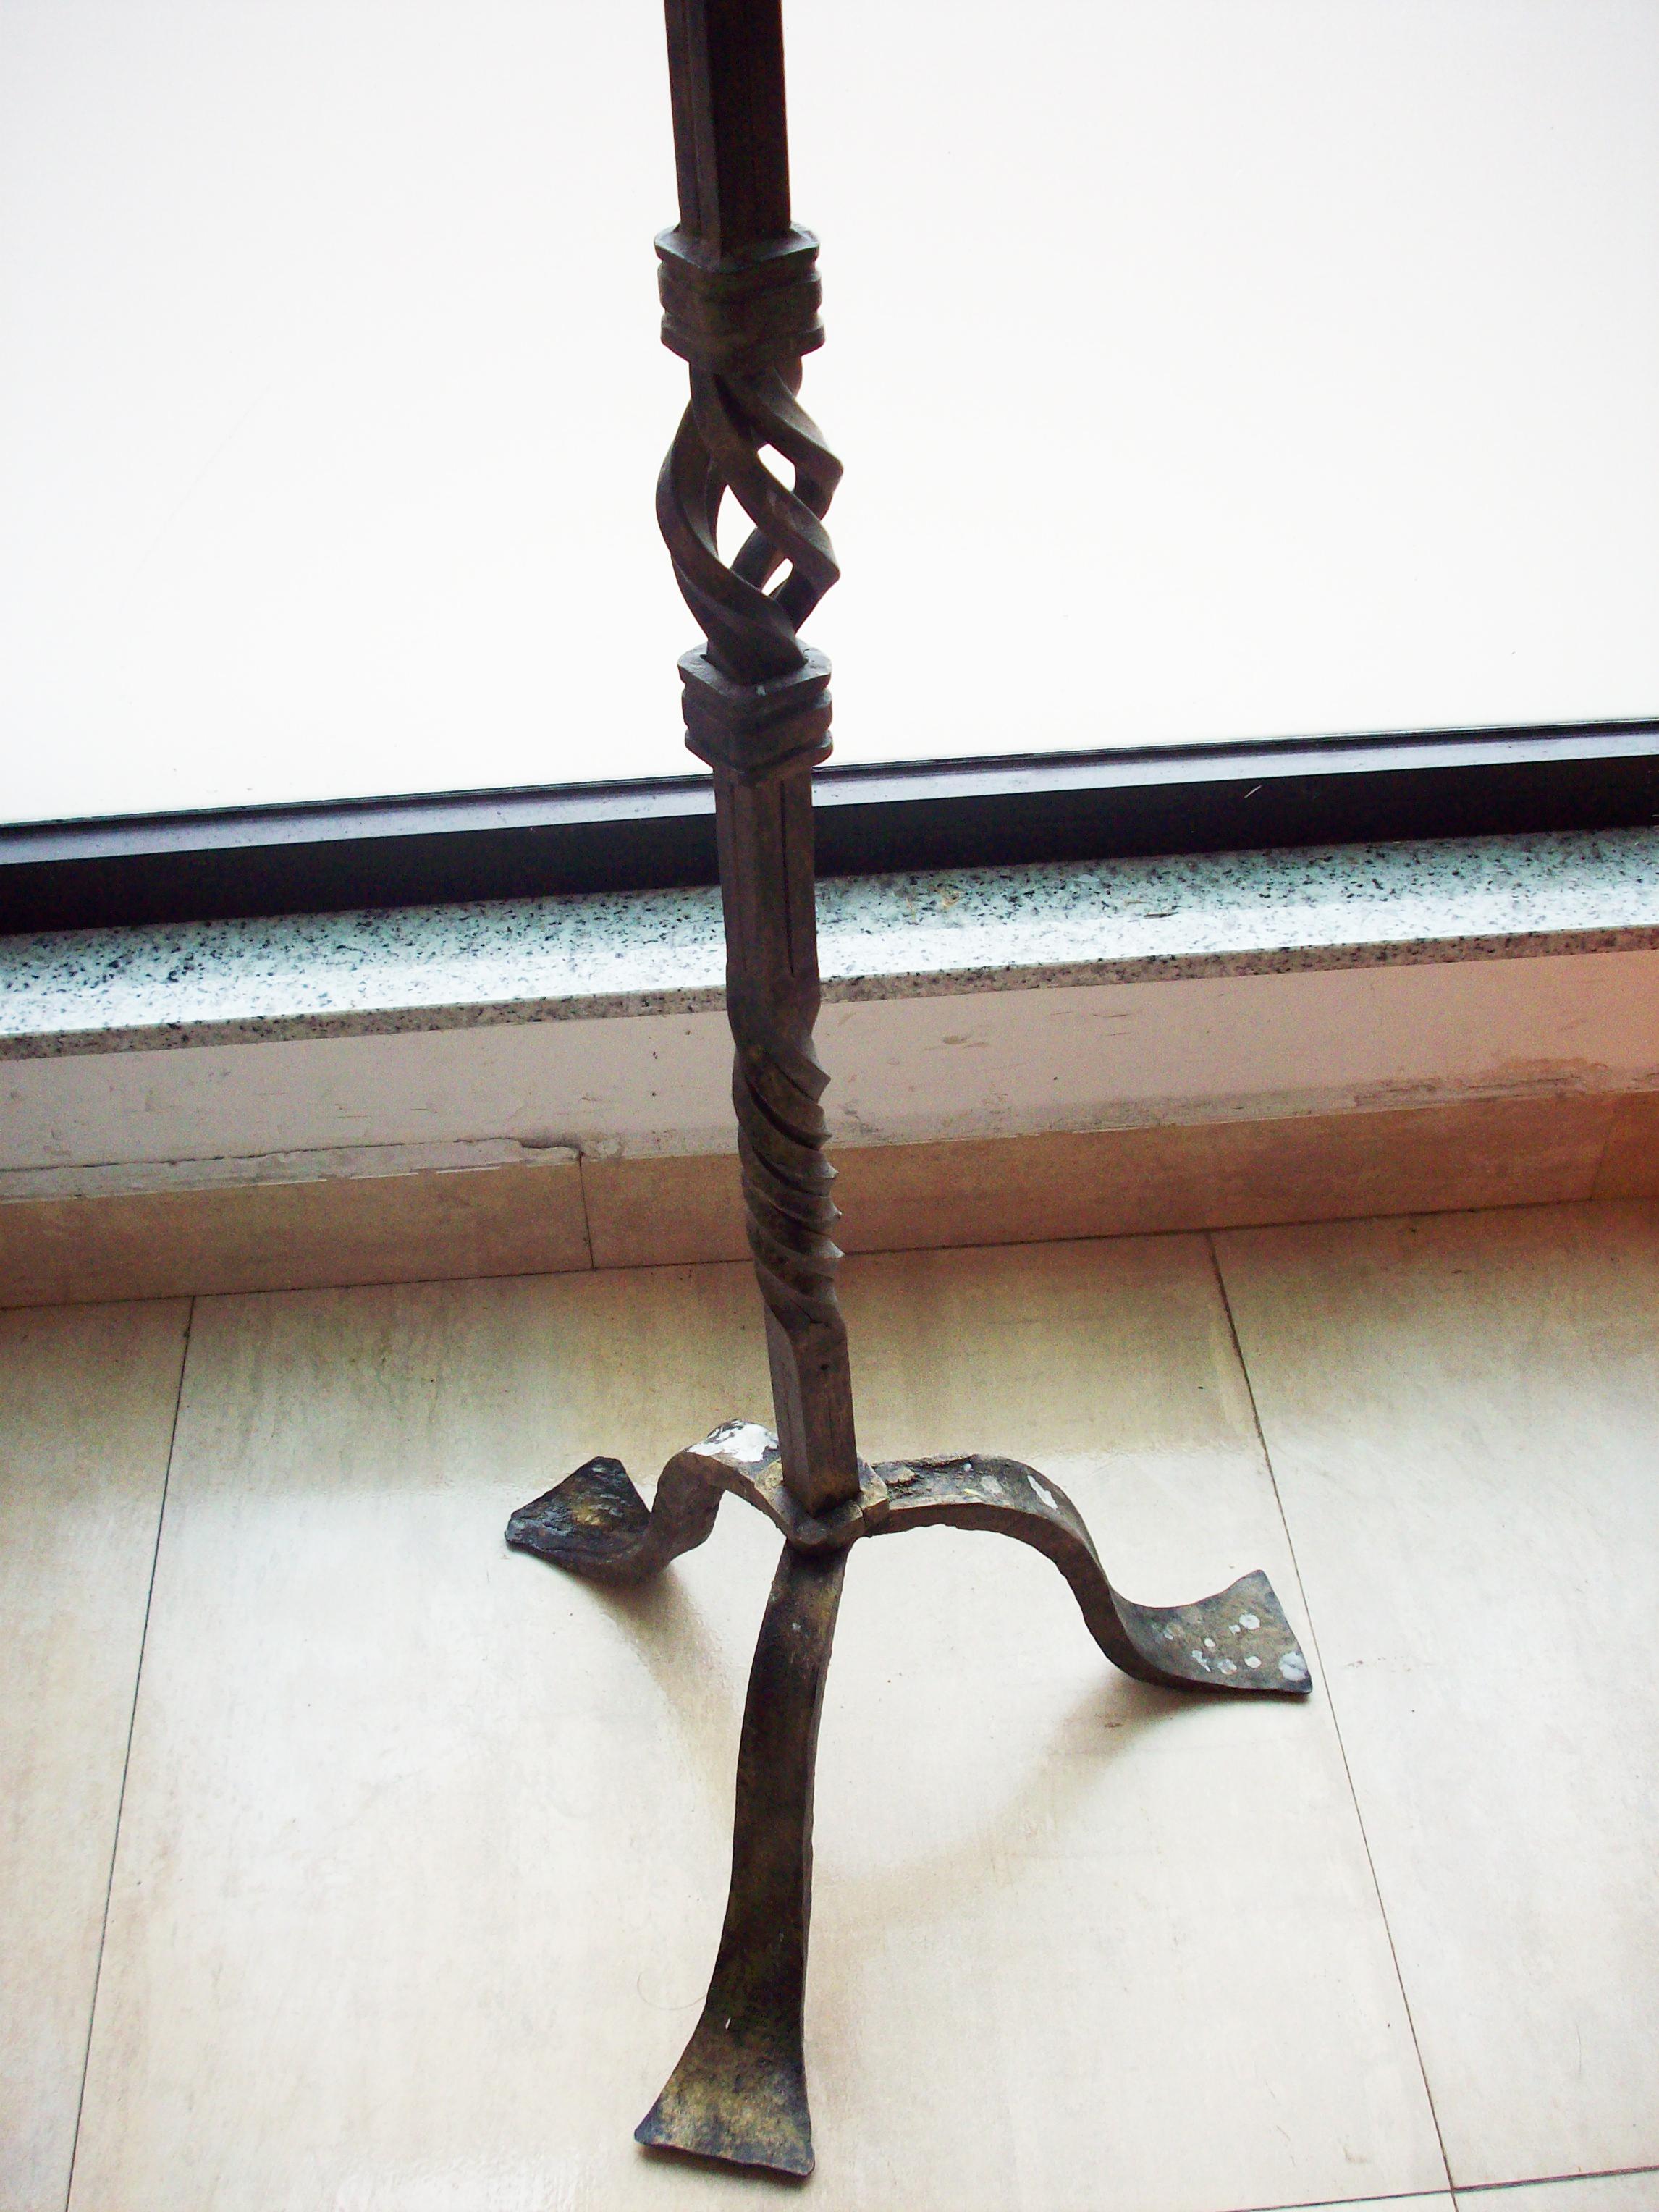 Floor Candle Stands with 9 Candles, Wrought Iron, Spainish Medieval Style In Excellent Condition For Sale In Mombuey, Zamora